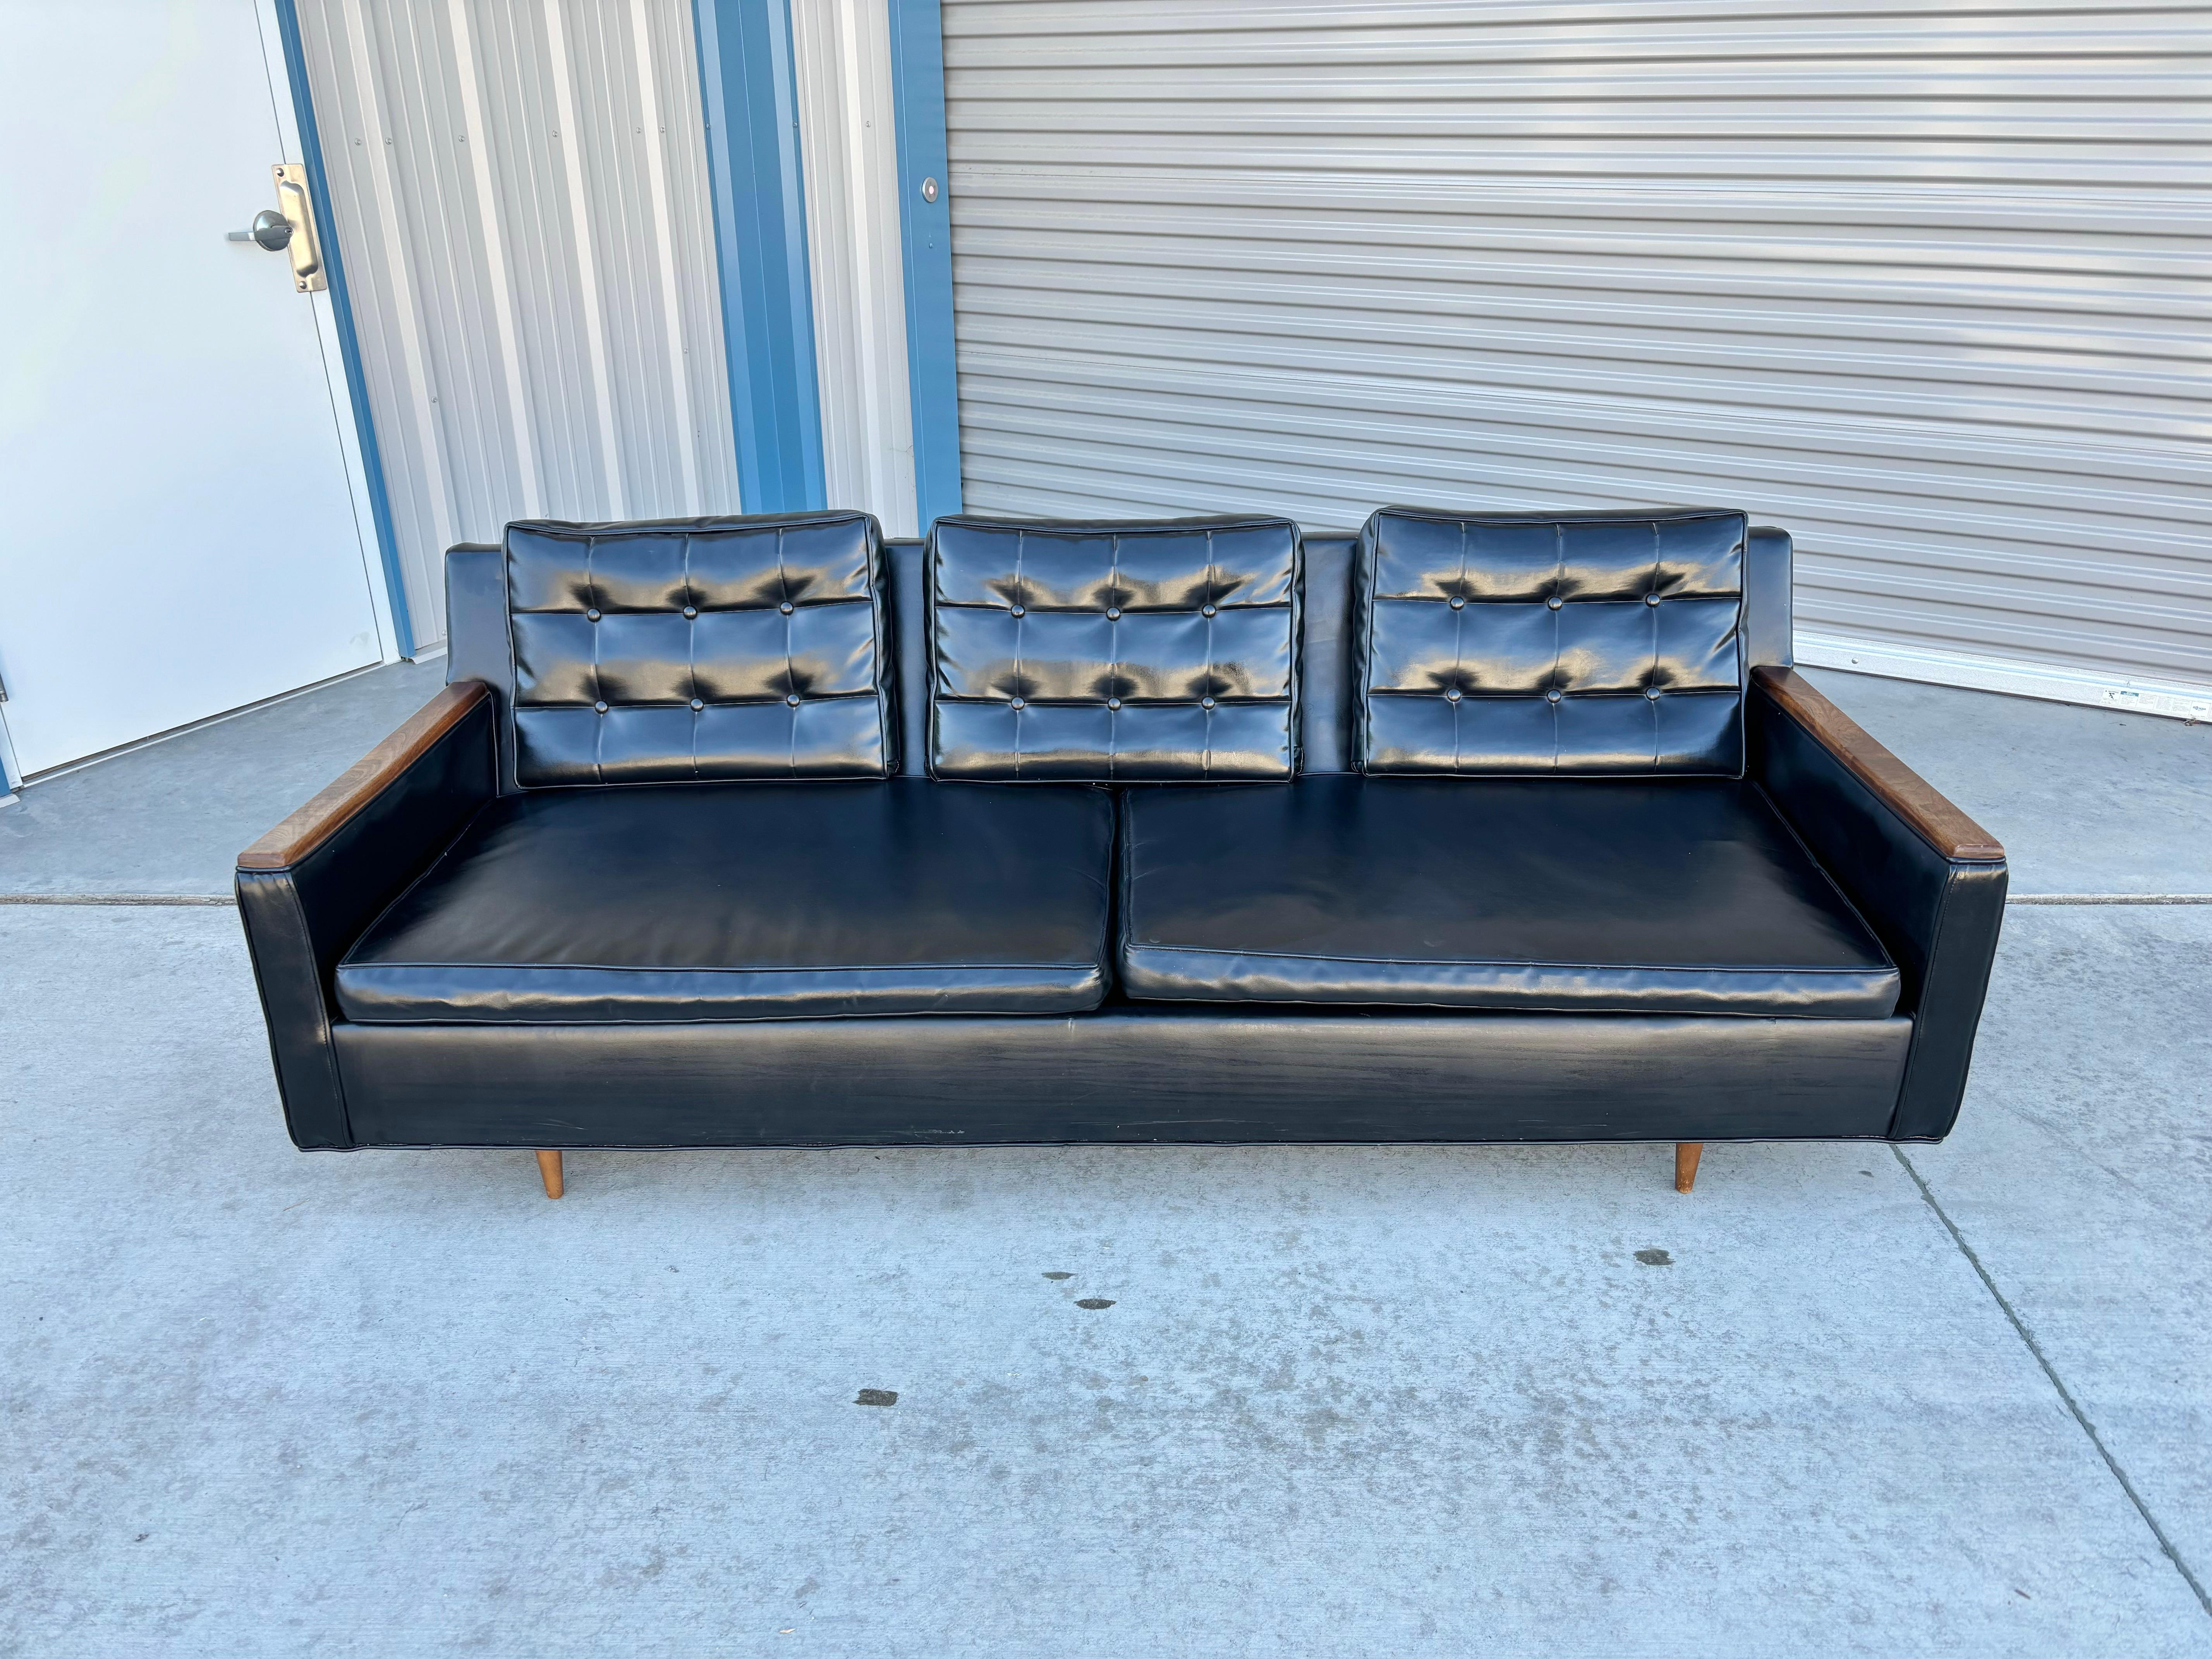 This mid-century walnut and vinyl sofa was designed and manufactured in the United States in the 1970s. This magnificent piece of furniture boasts sleek black vinyl upholstery, and what sets it apart is the exquisite walnut slates adorning its